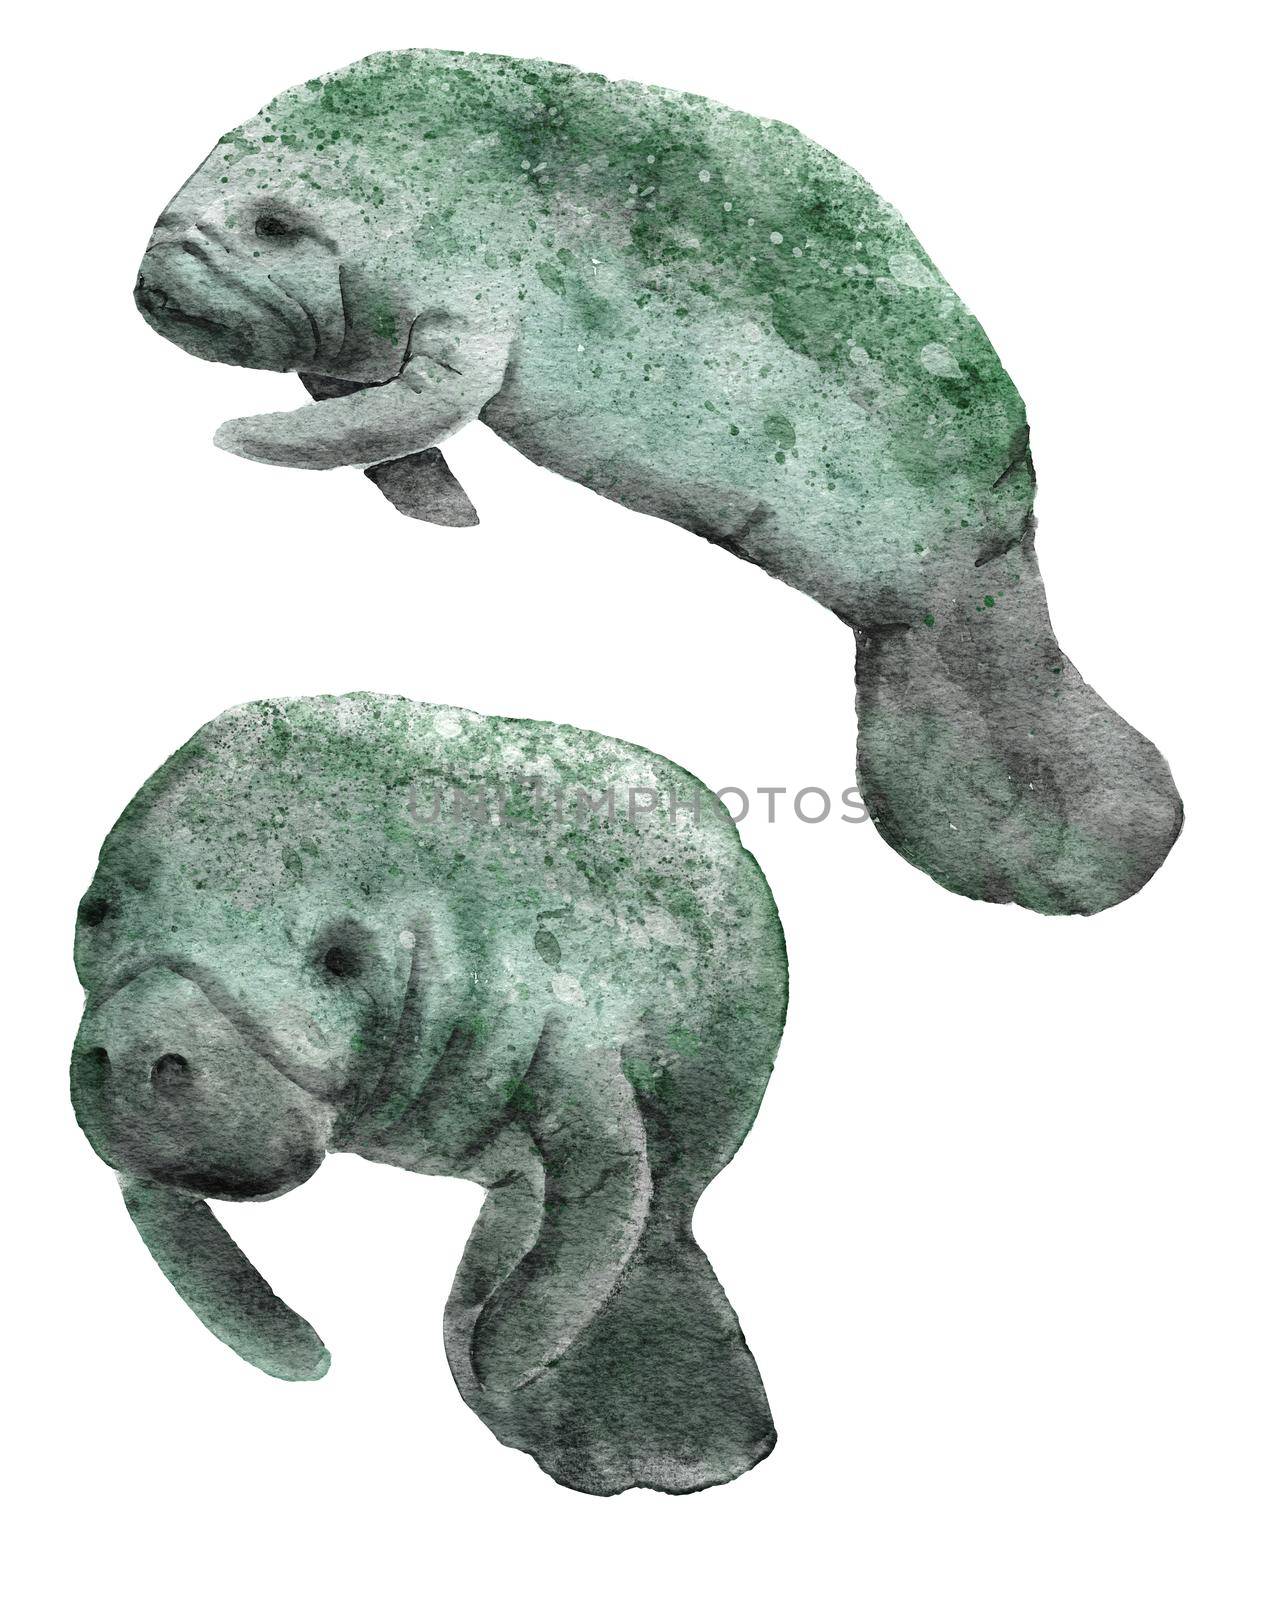 Watercolor hand drawn illustration of florida manatee marine animal. Sea ocea underwater mammal, endangered species in the wild, water wildlife, ecology environment river protection. by Lagmar